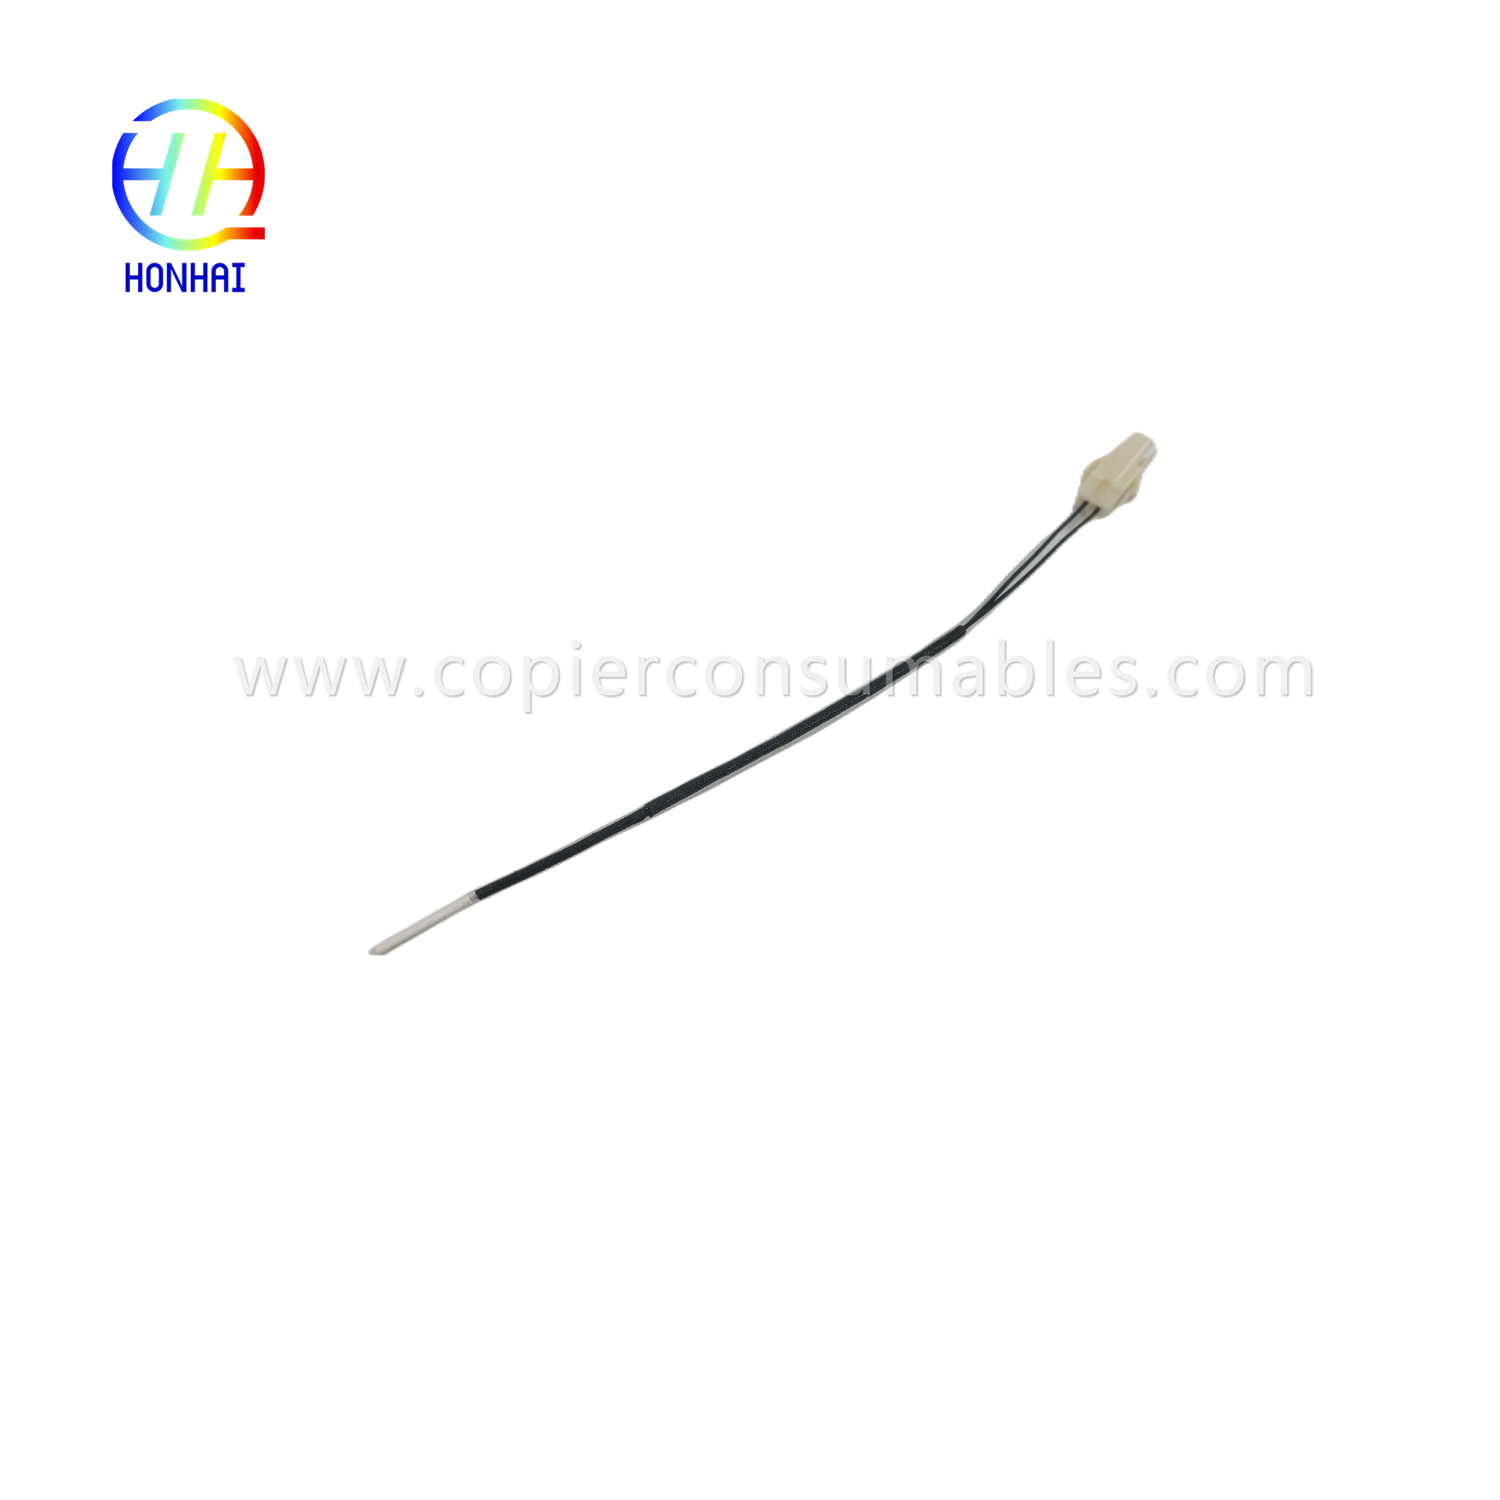 Fuser Thermistor for OCE Pw300 340 350 360 365 TDS100 320 400 450 500 7050 9300 9400